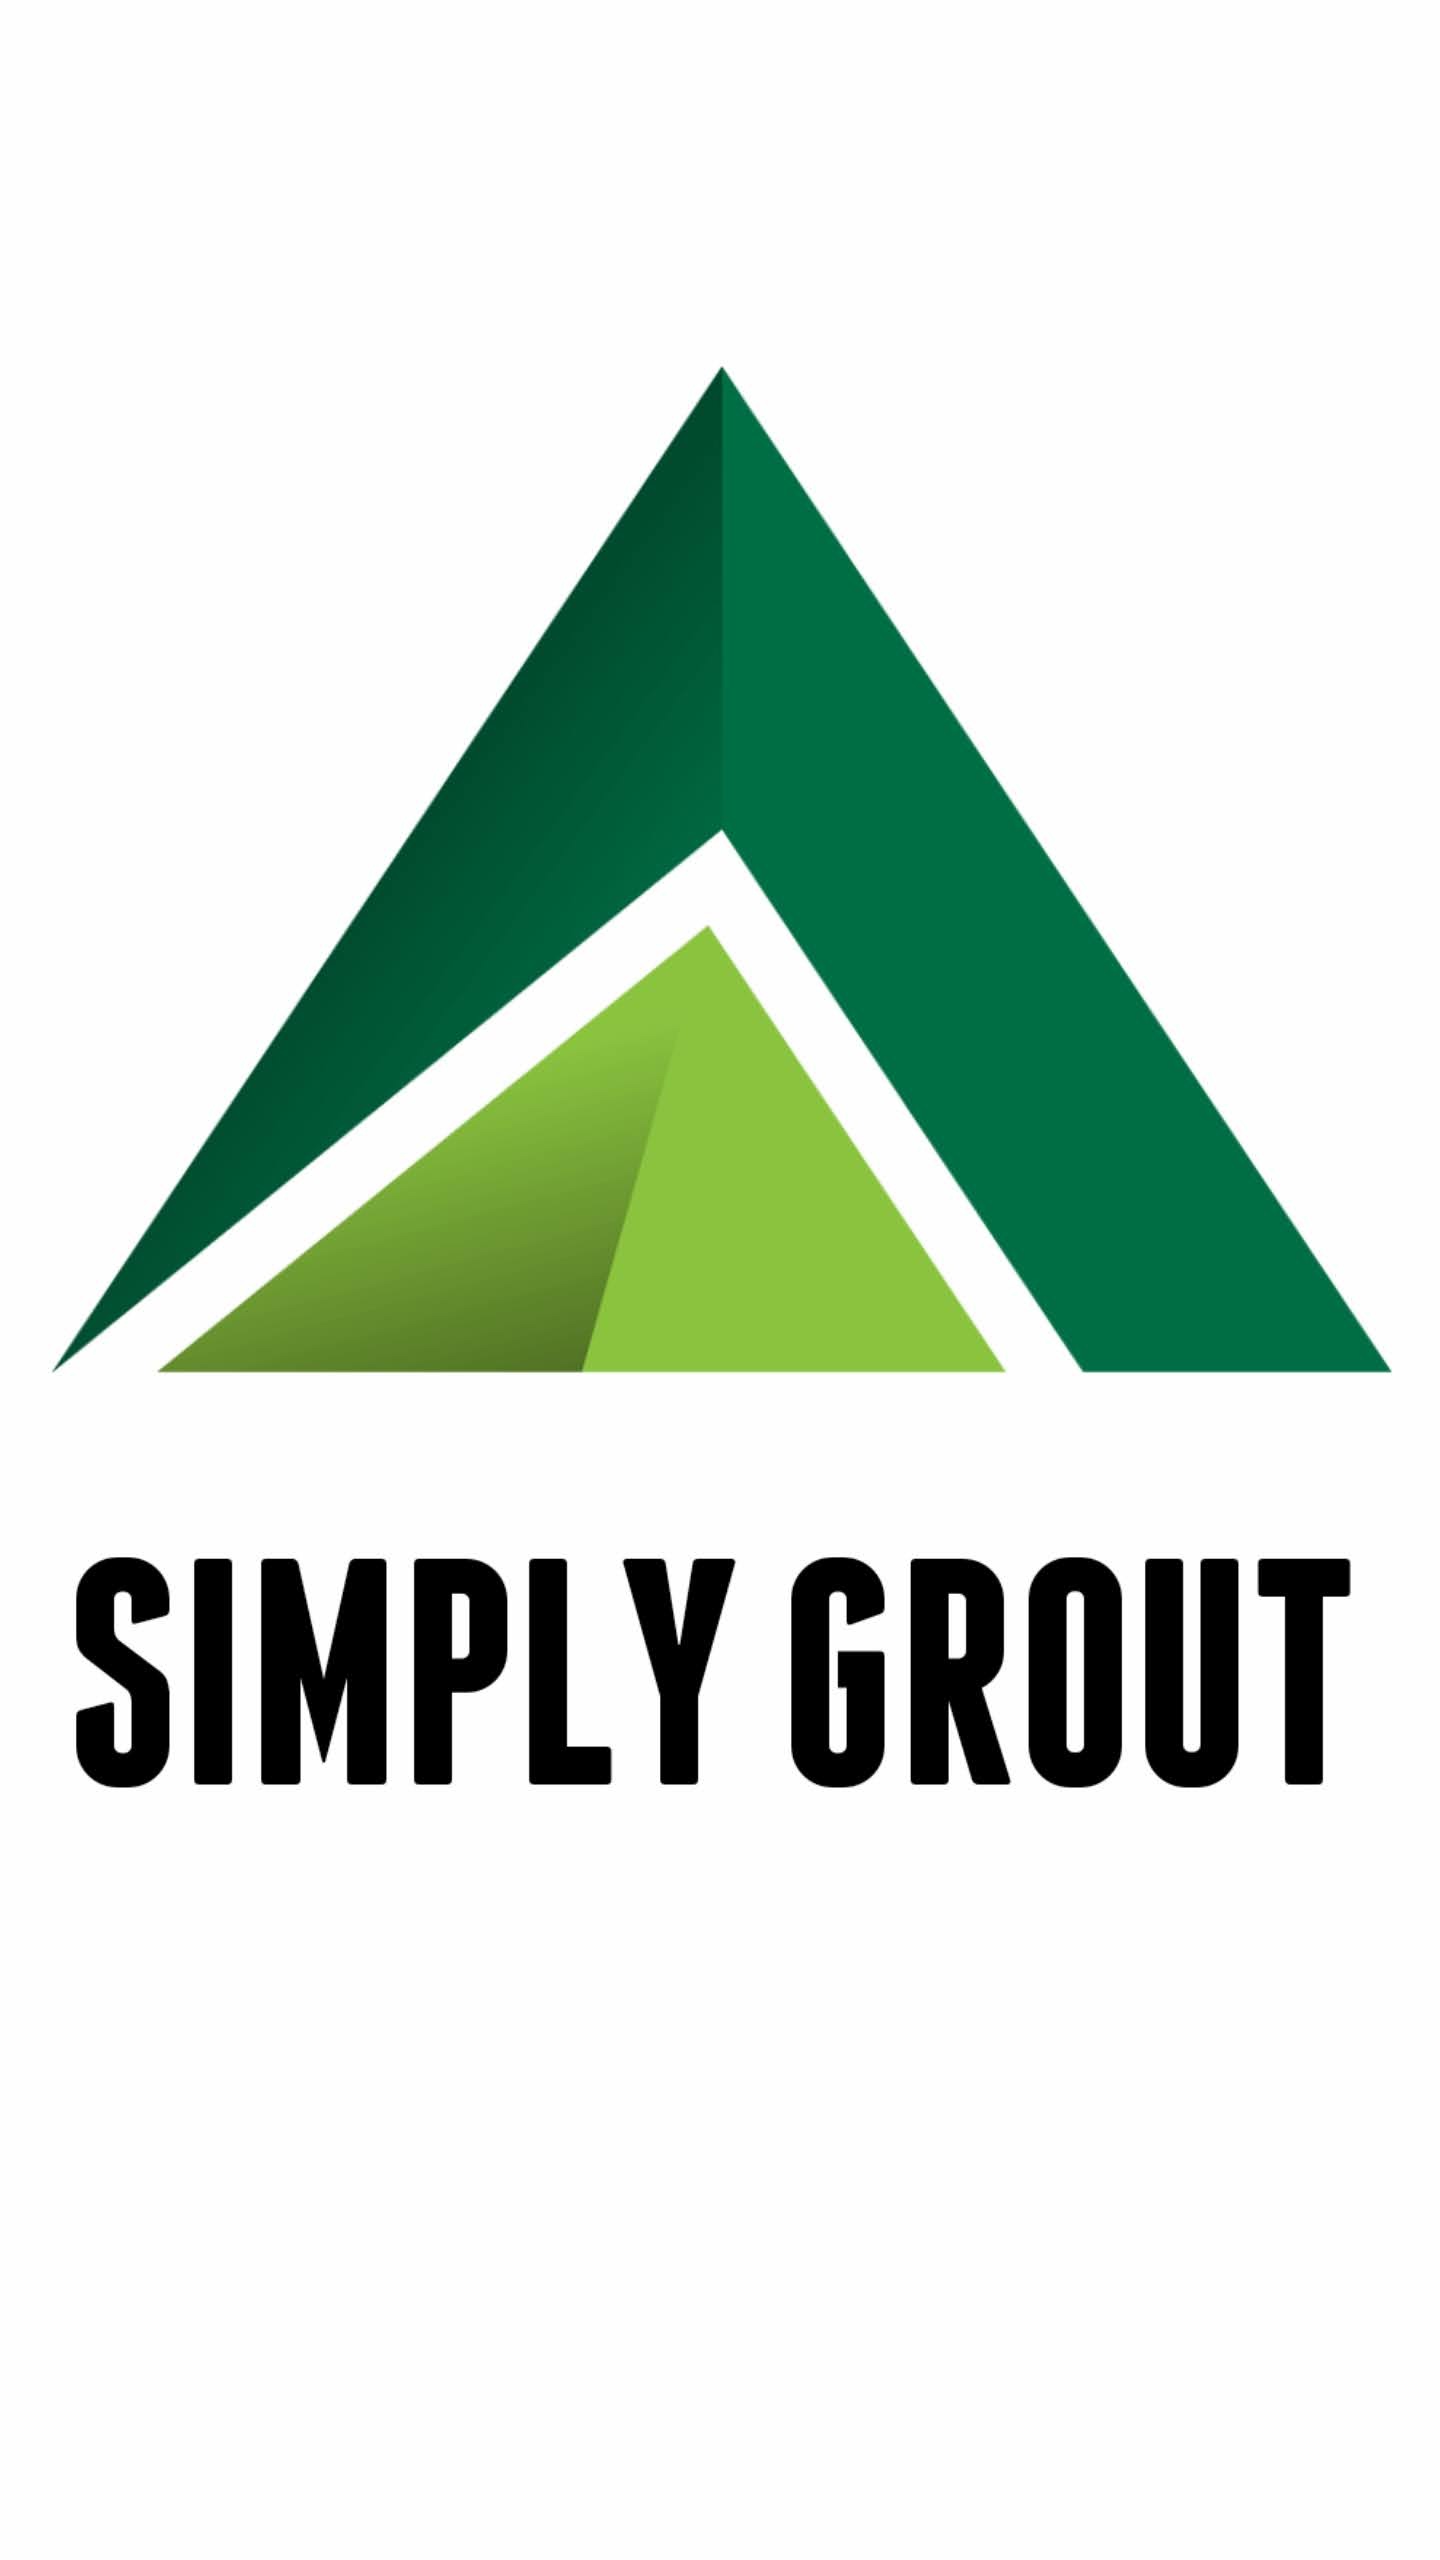 Simply Grout Logo